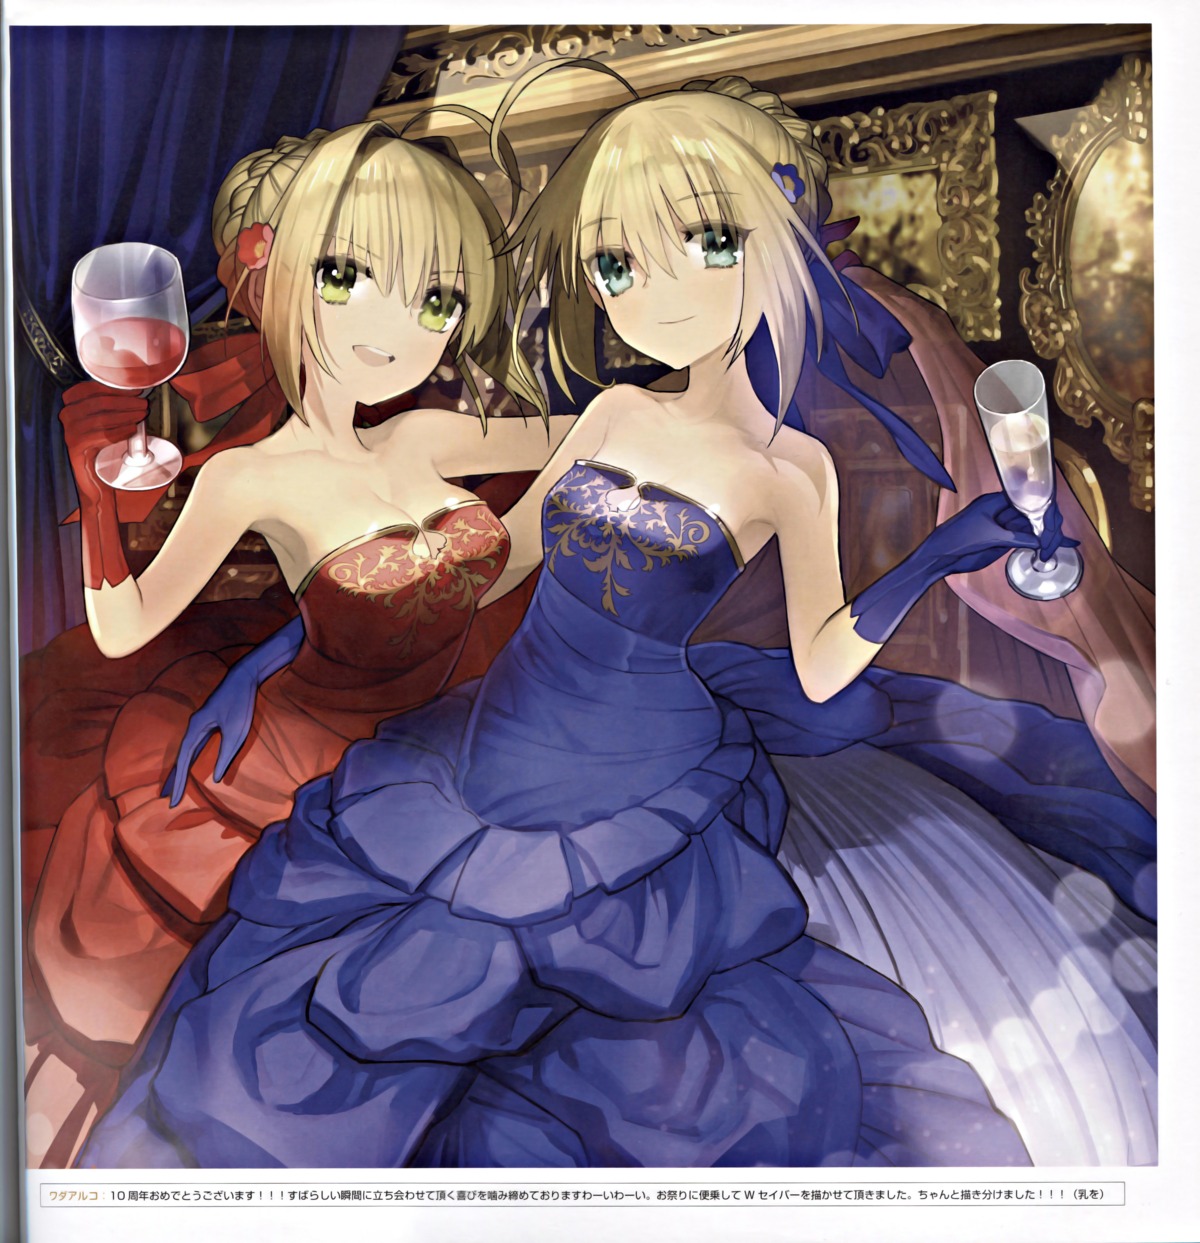 binding_discoloration cleavage dress fate/extra fate/stay_night saber saber_extra type-moon wada_rco